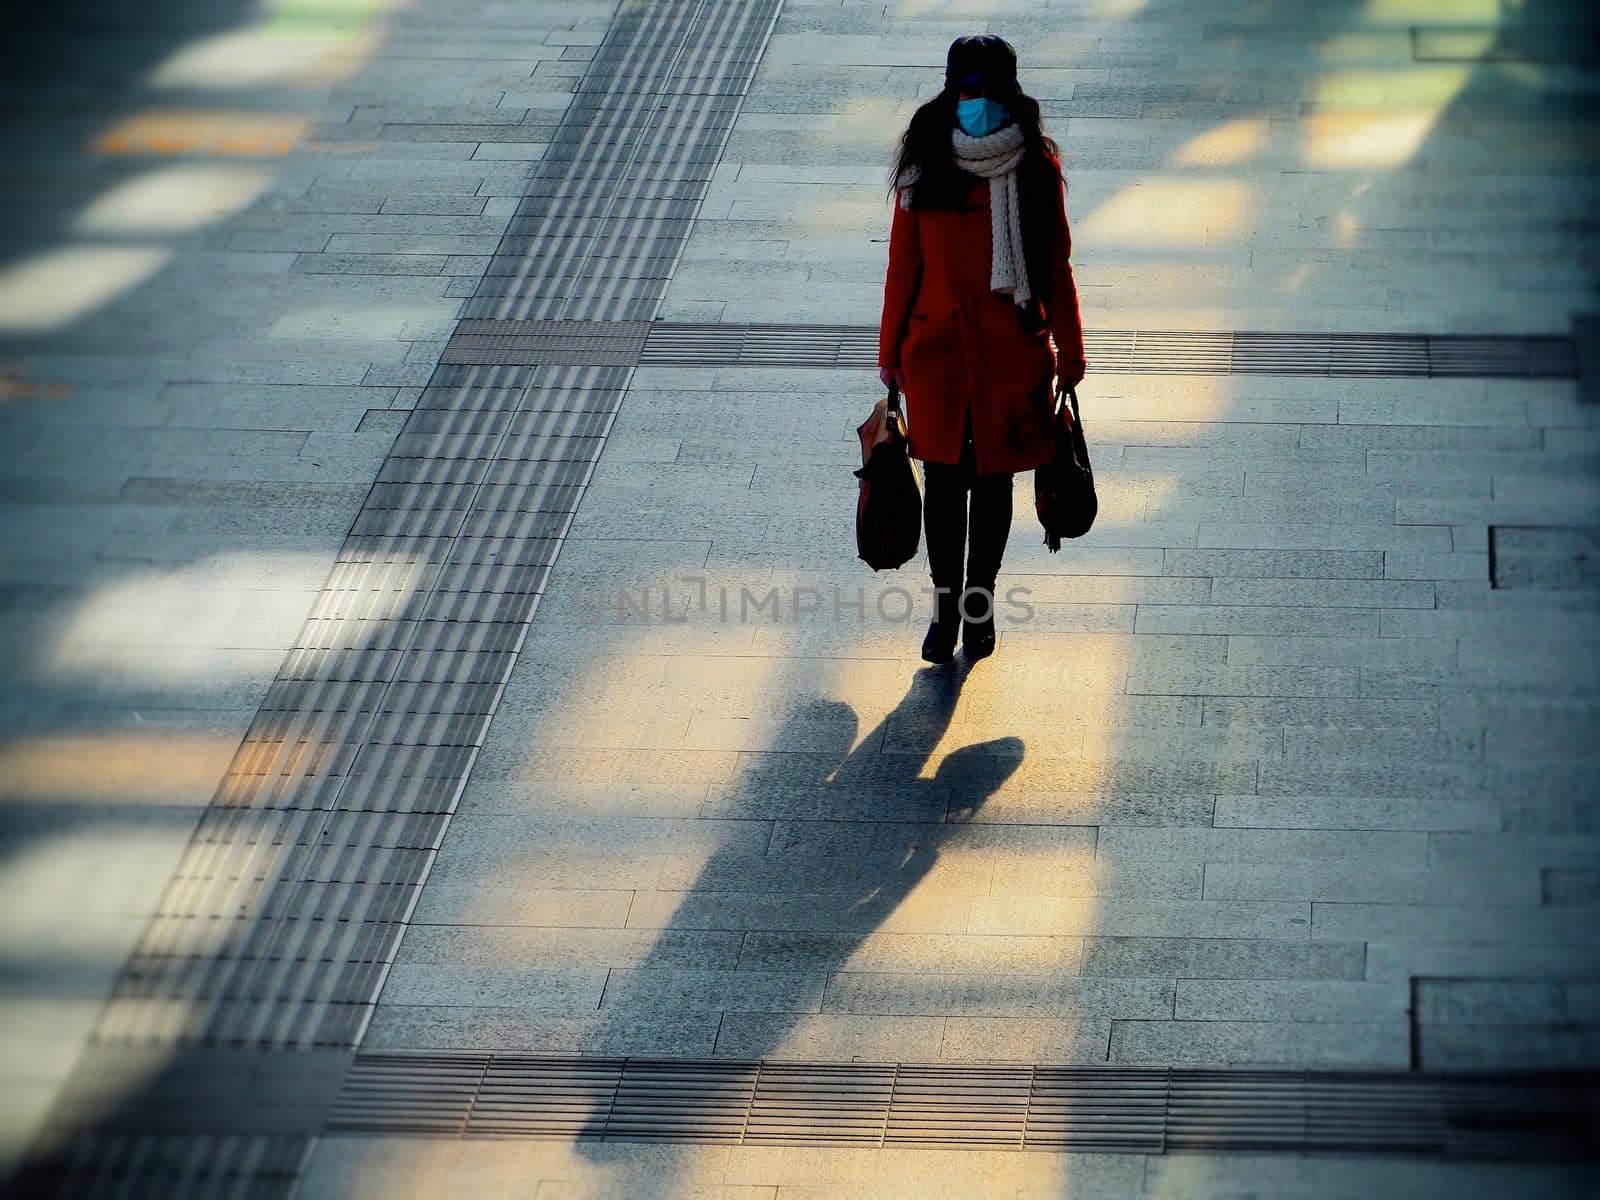 Unrecognizable lonely woman walking wearing protective mask on grainy stone sidewalk Turin Italy January 13 2021 by lemar